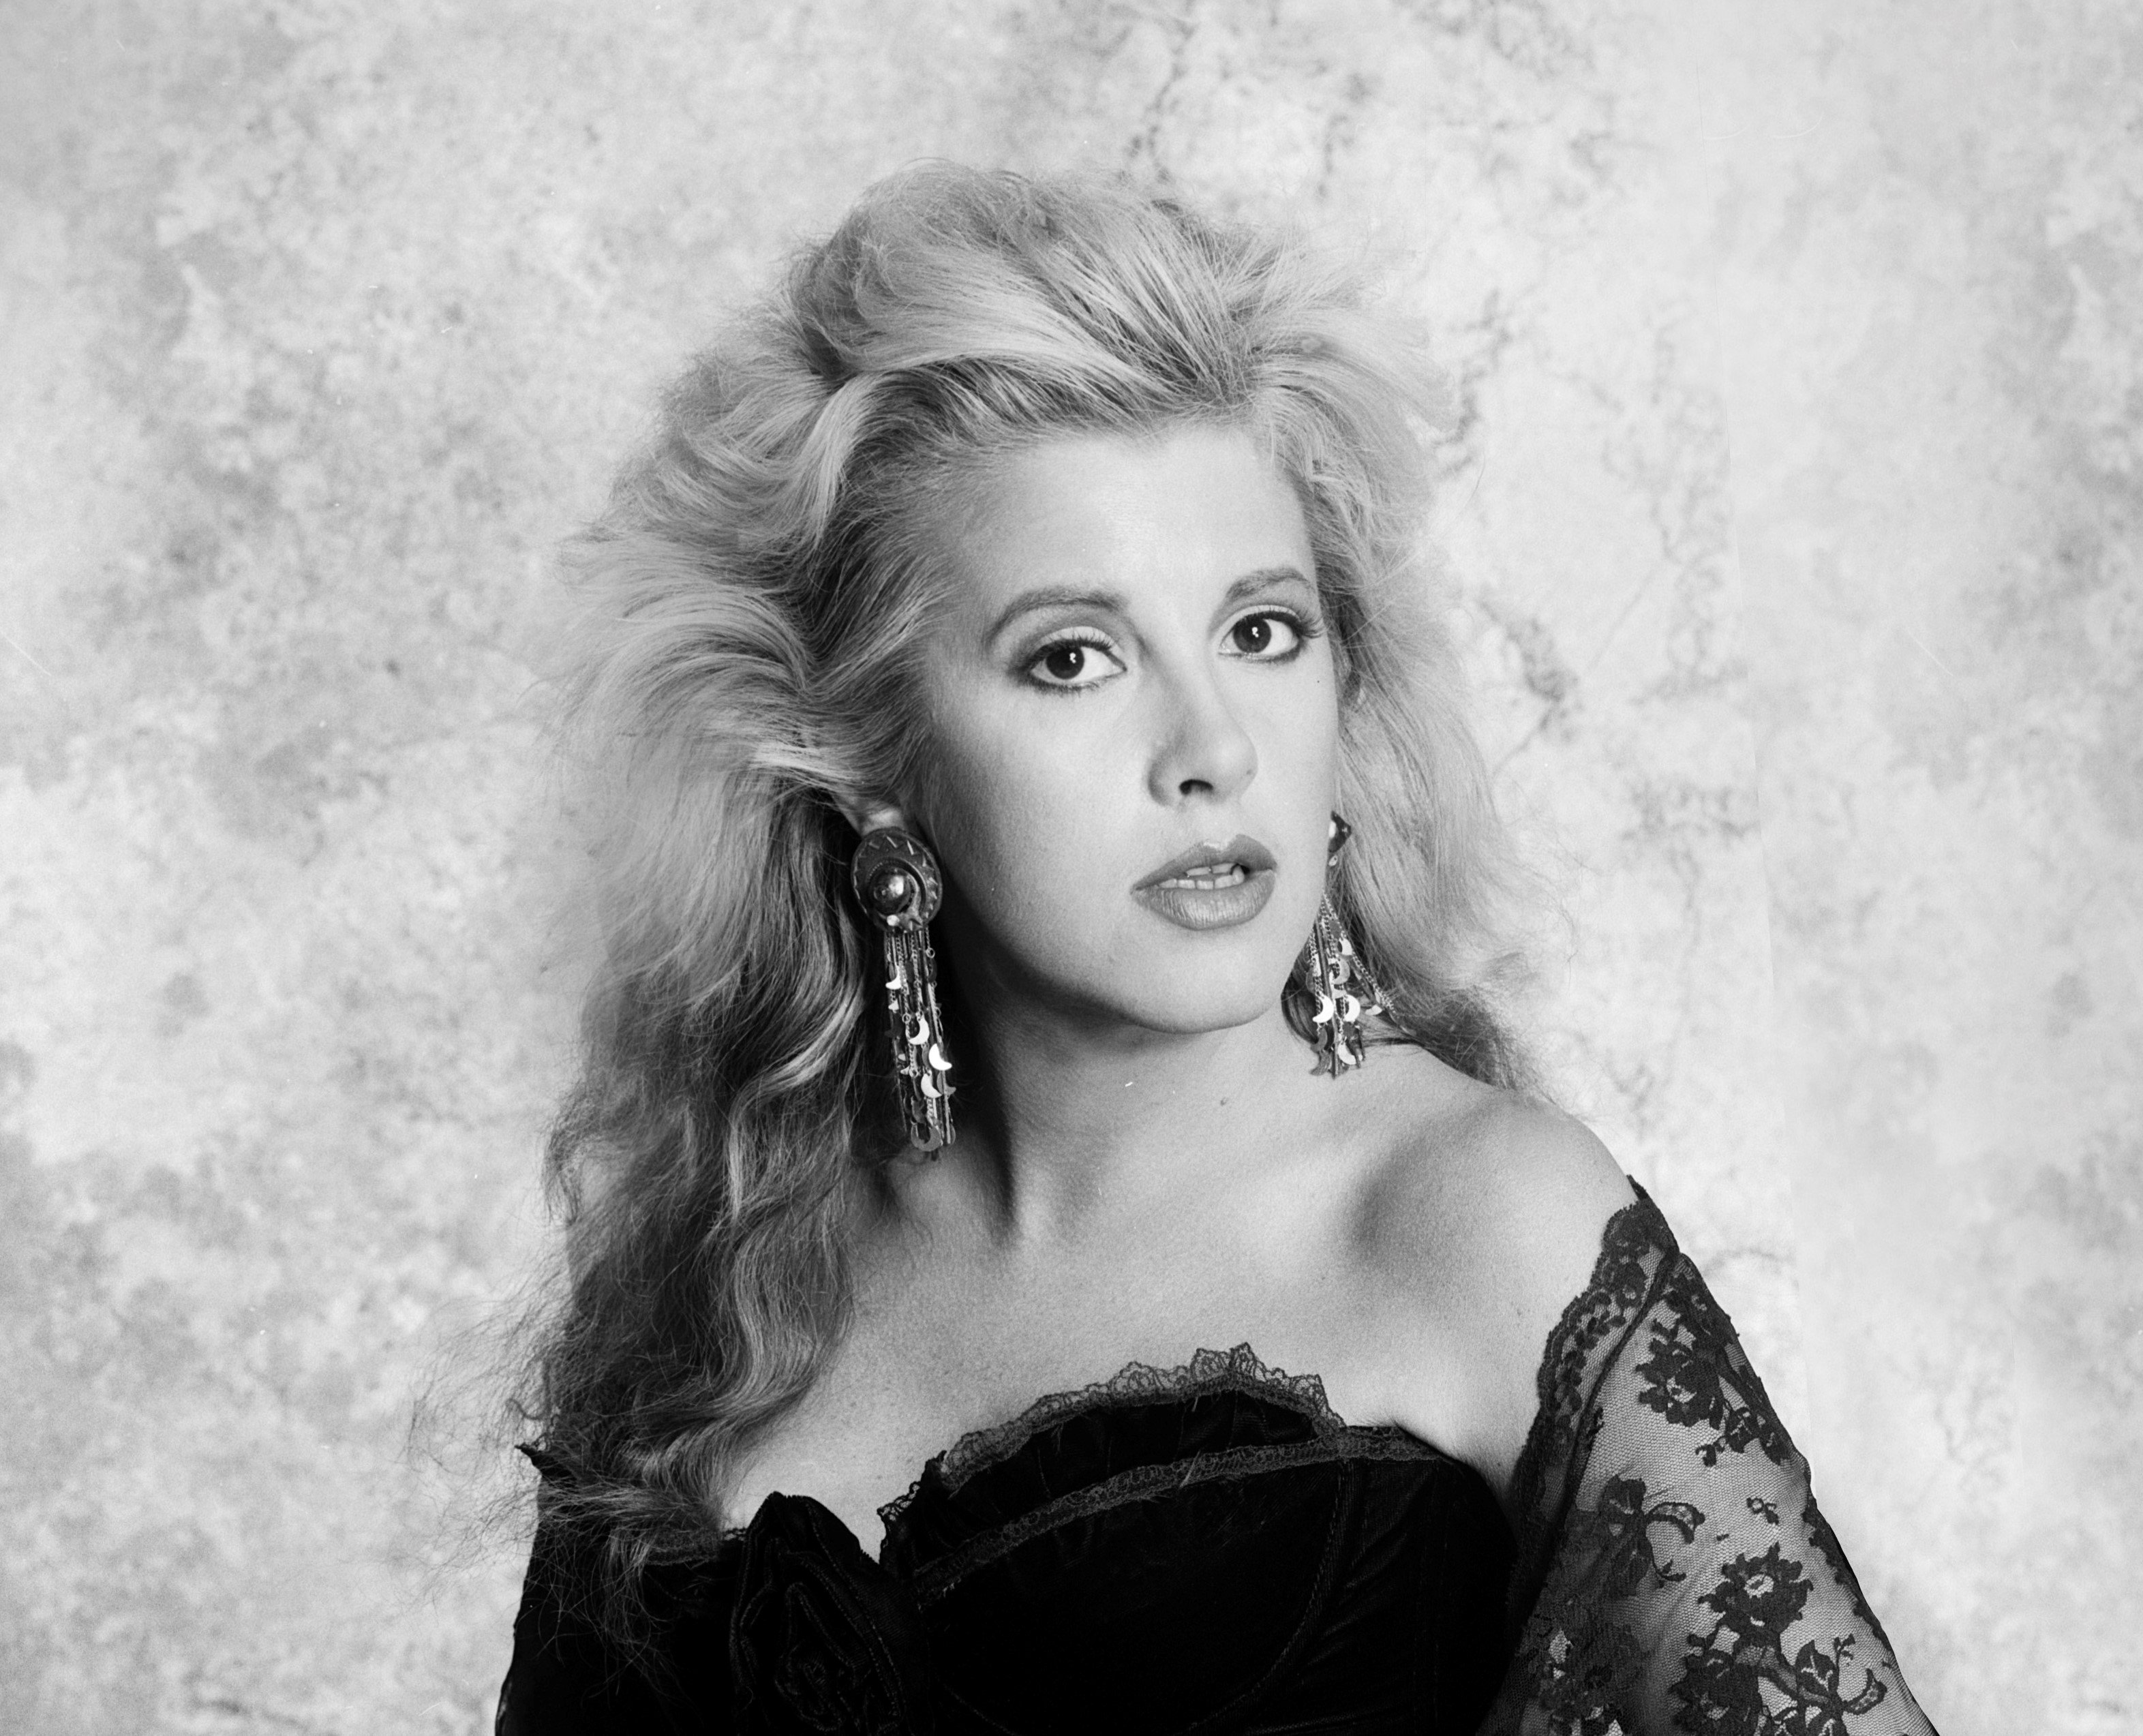 A black and white photo of Stevie Nicks wearing a lace top and dangling earrings.